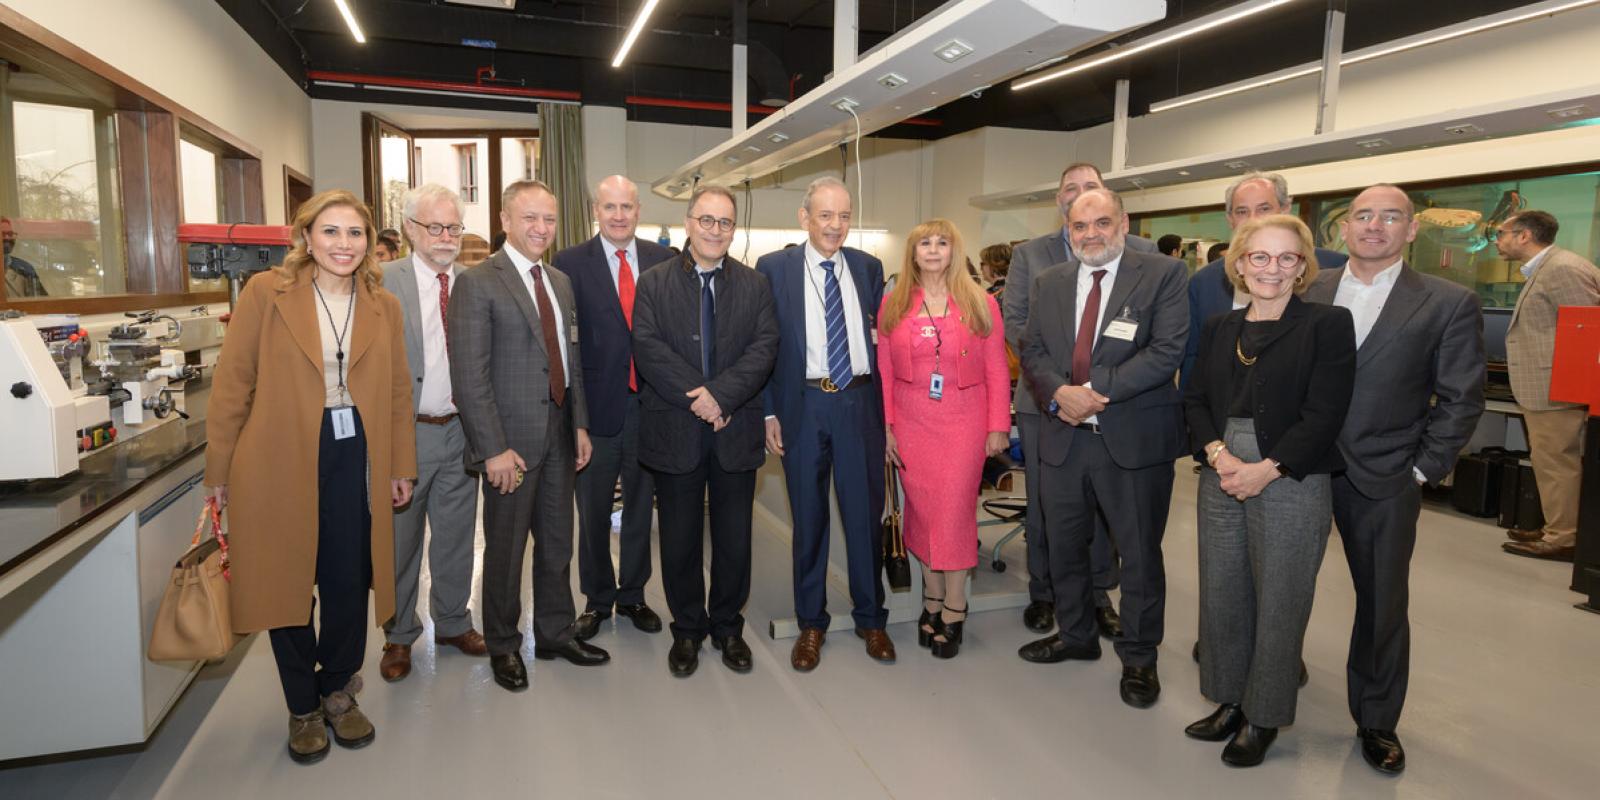 The Board of Trustees, faculty and staff visit Eltoukhy Learning Factory, pose in a line in front of lab equipment